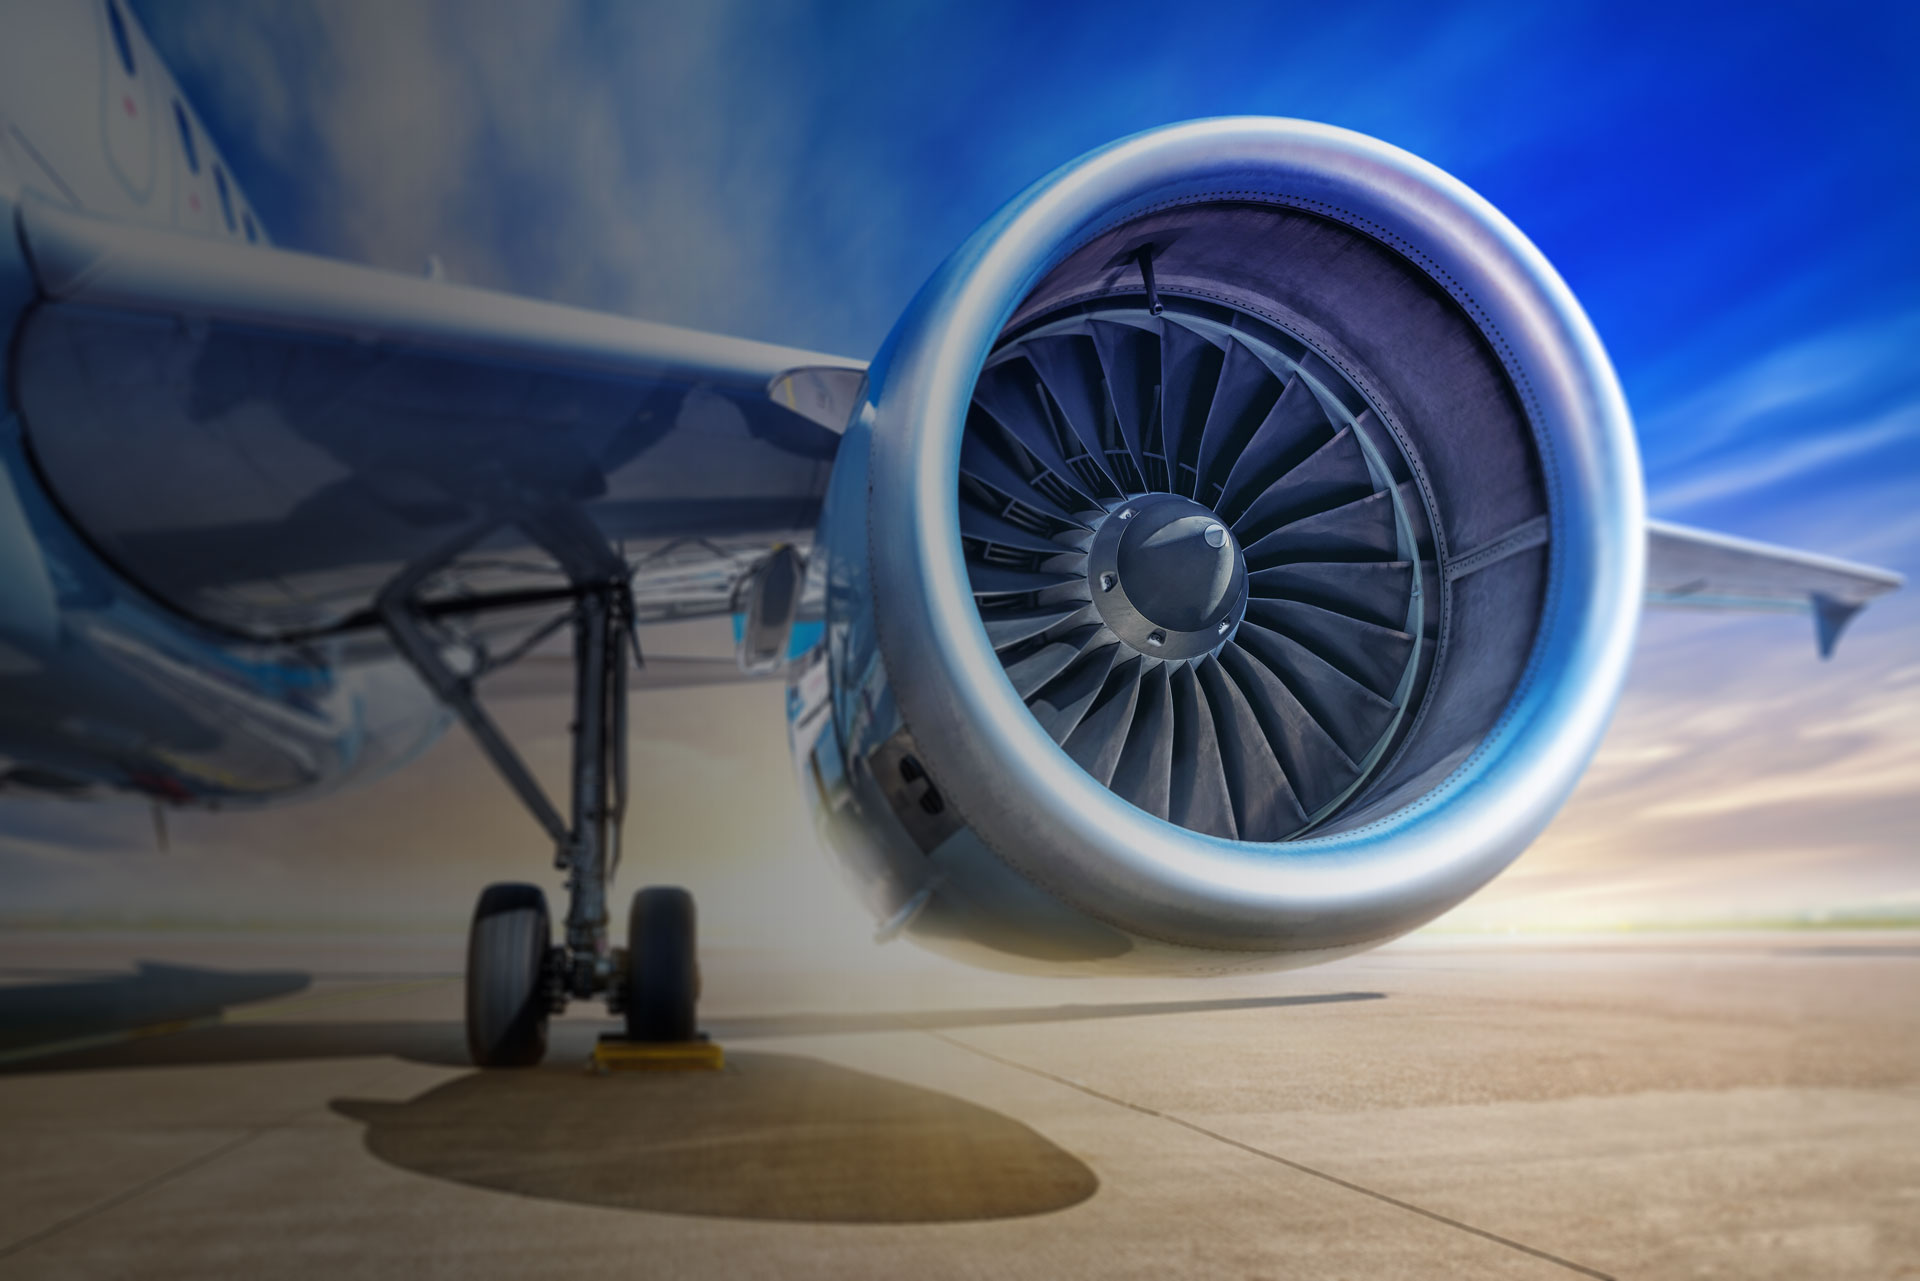 Dynamic Optimization of Inventory Management in Aerospace Manufacturing - C3 IoT Industrial IoT Case Study